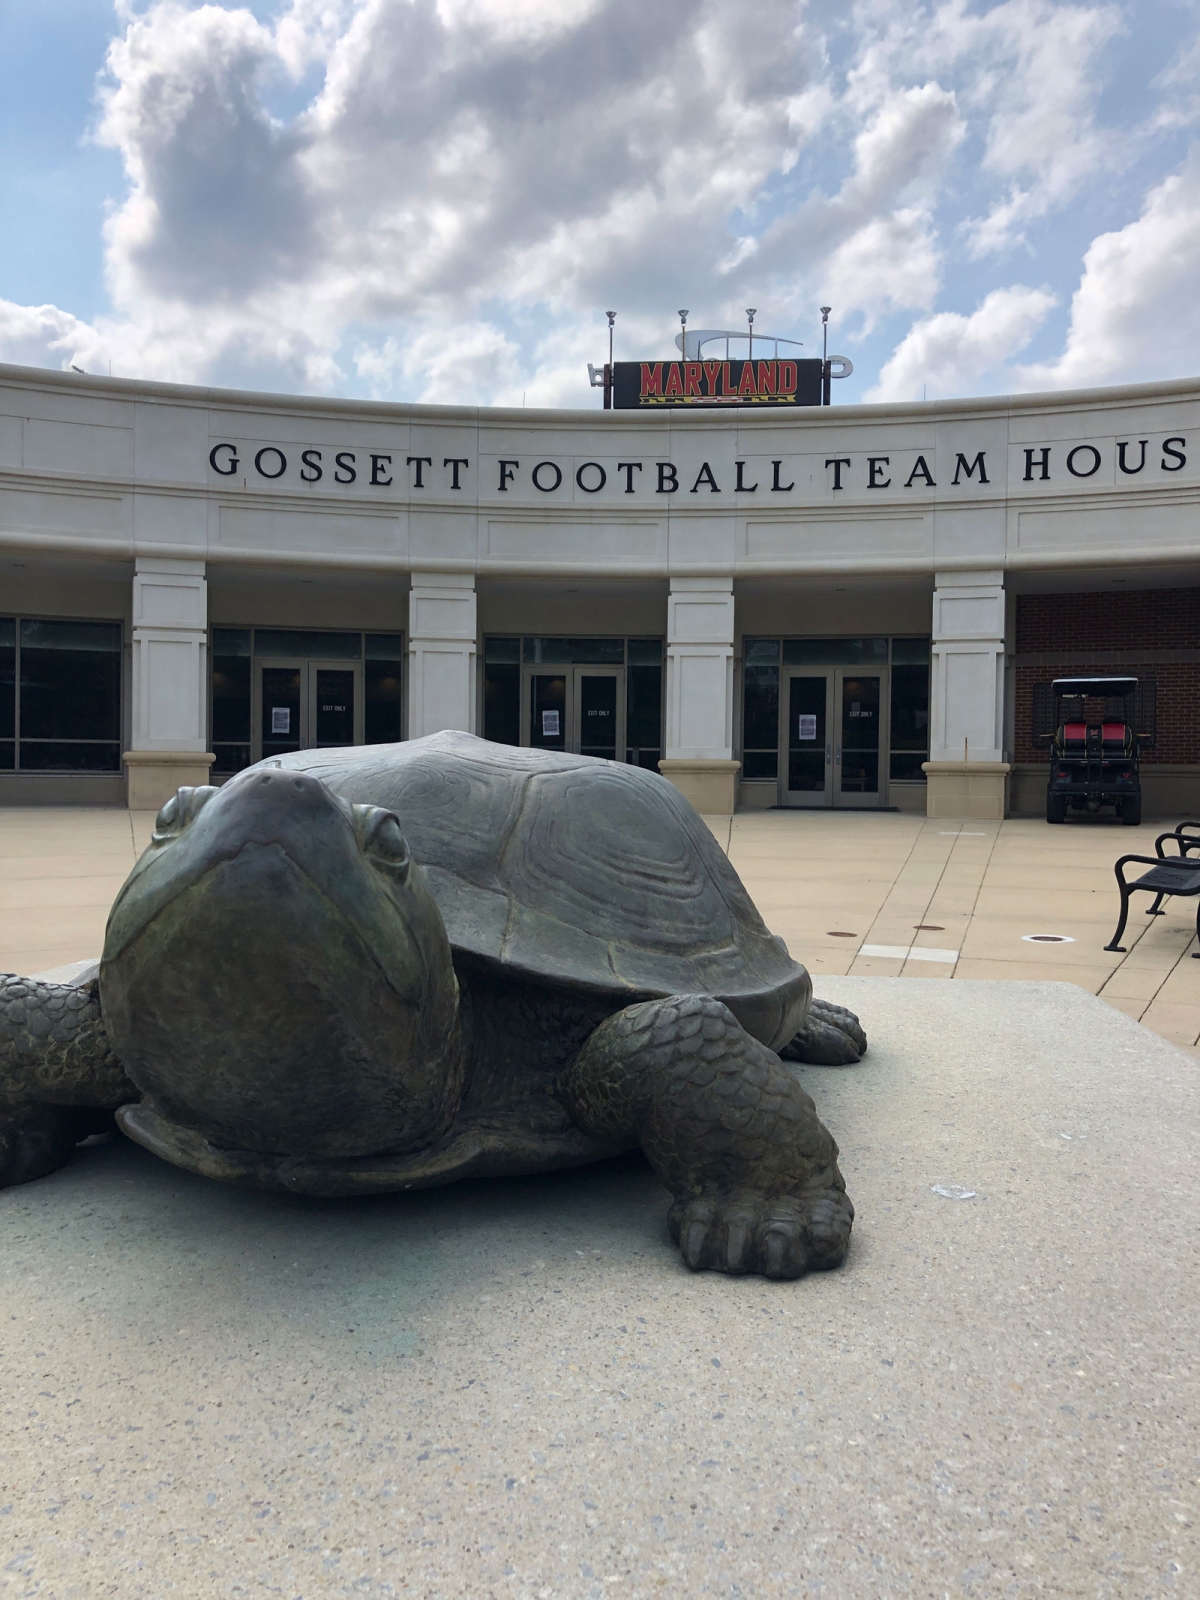 A large metal statue of Testudo the Terrapin at the University of Maryland campus.